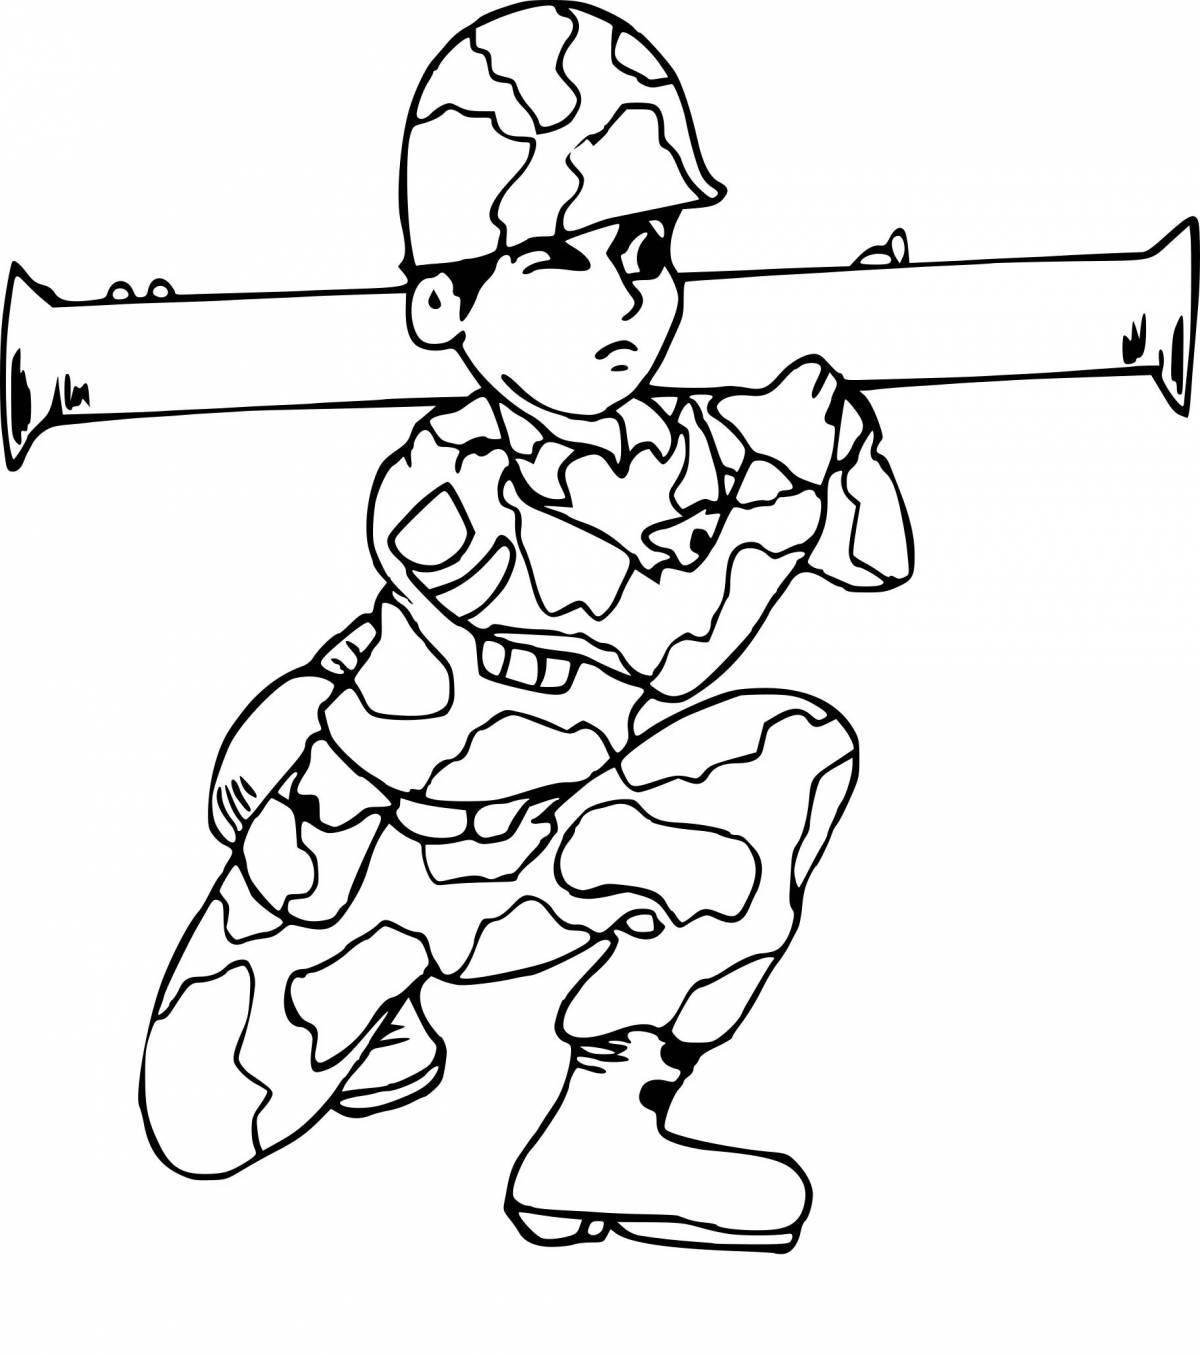 Soldier coloring book for kids